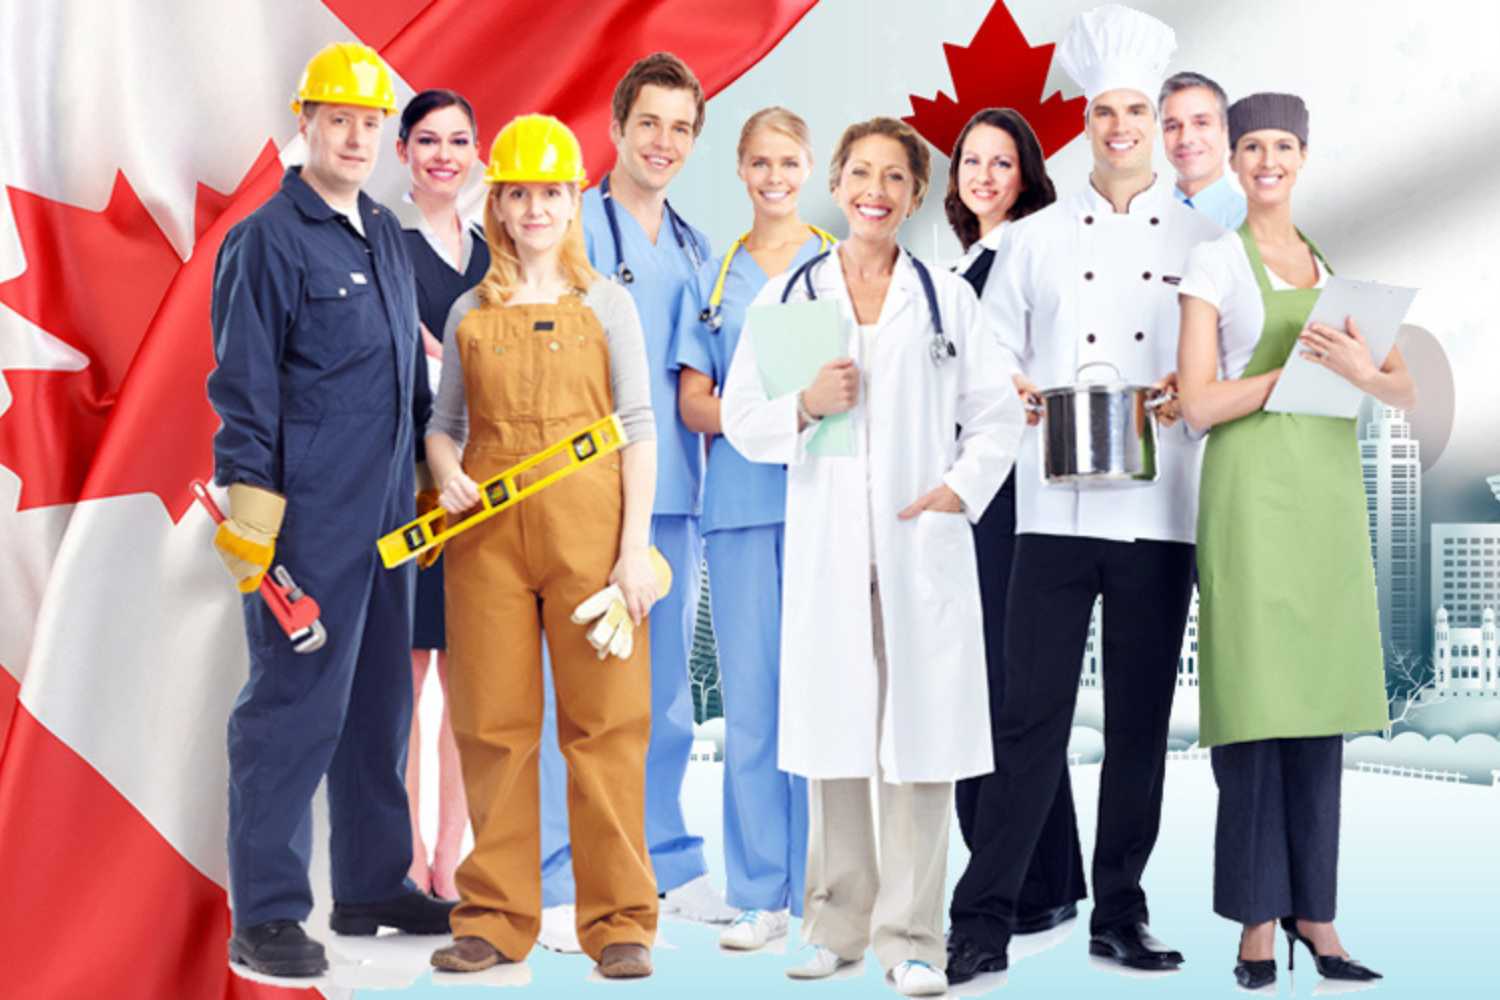 federal skilled workers canada